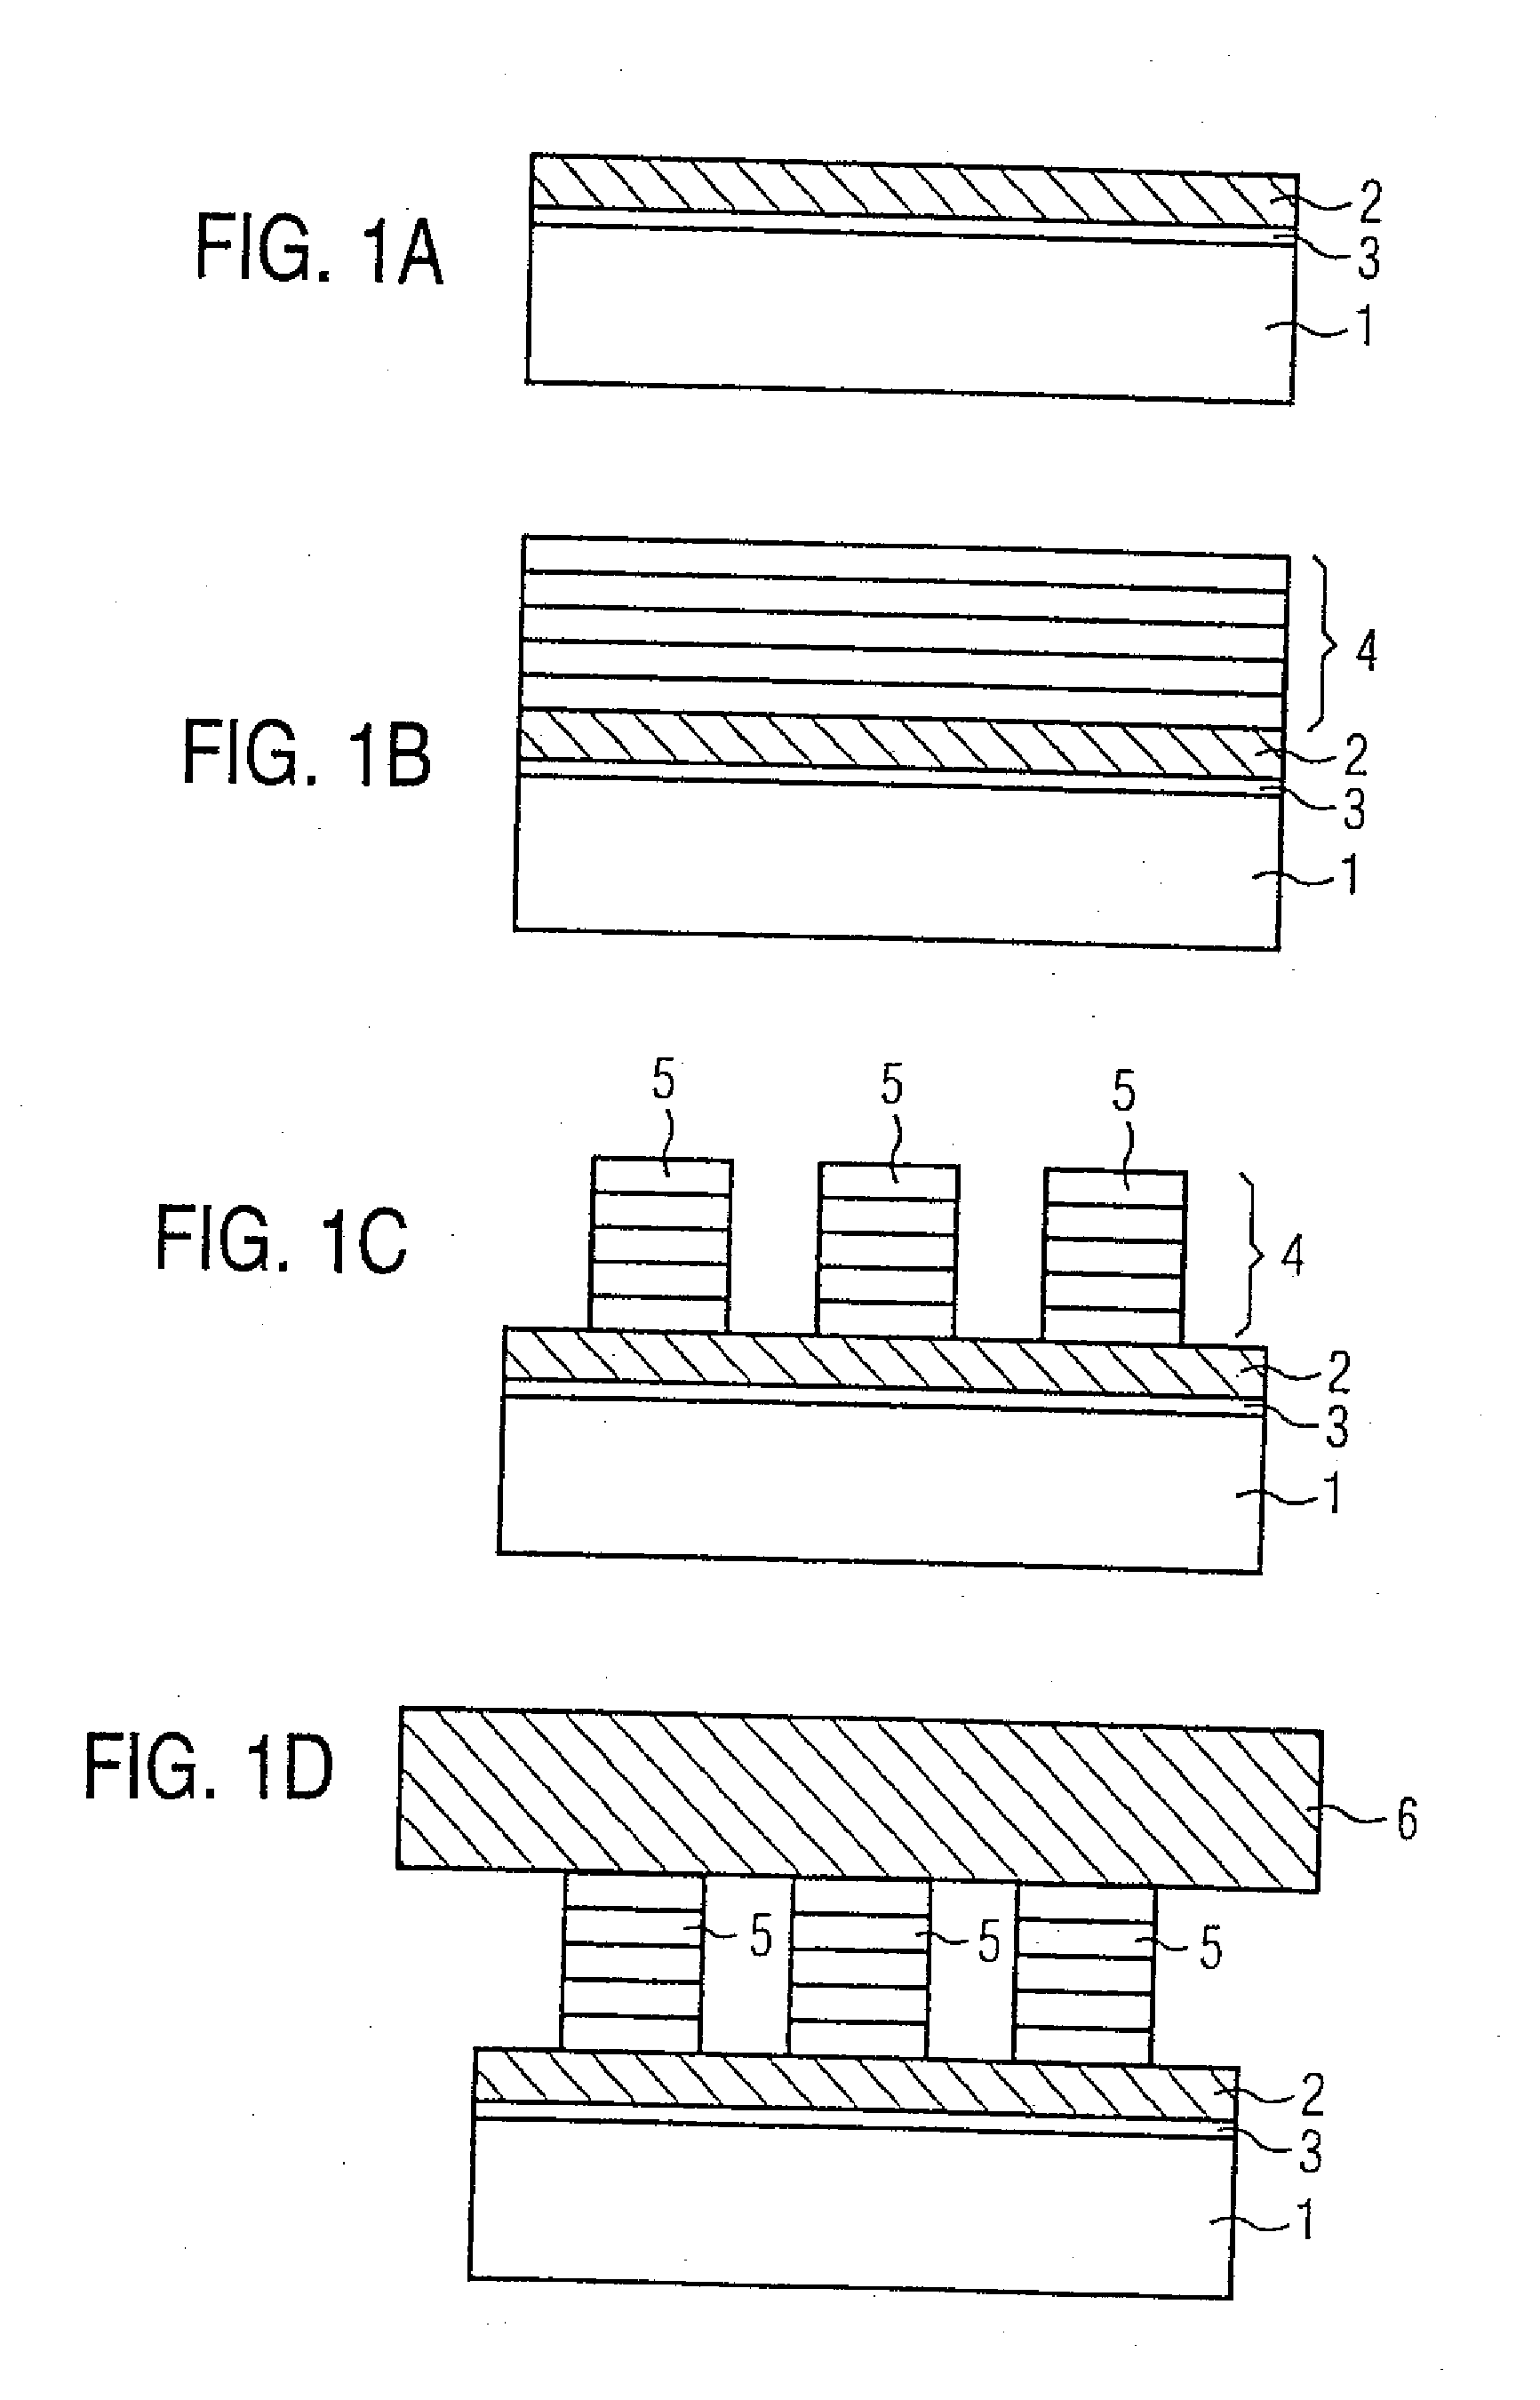 Method for Fabricating a Semiconductor Component Based on GaN